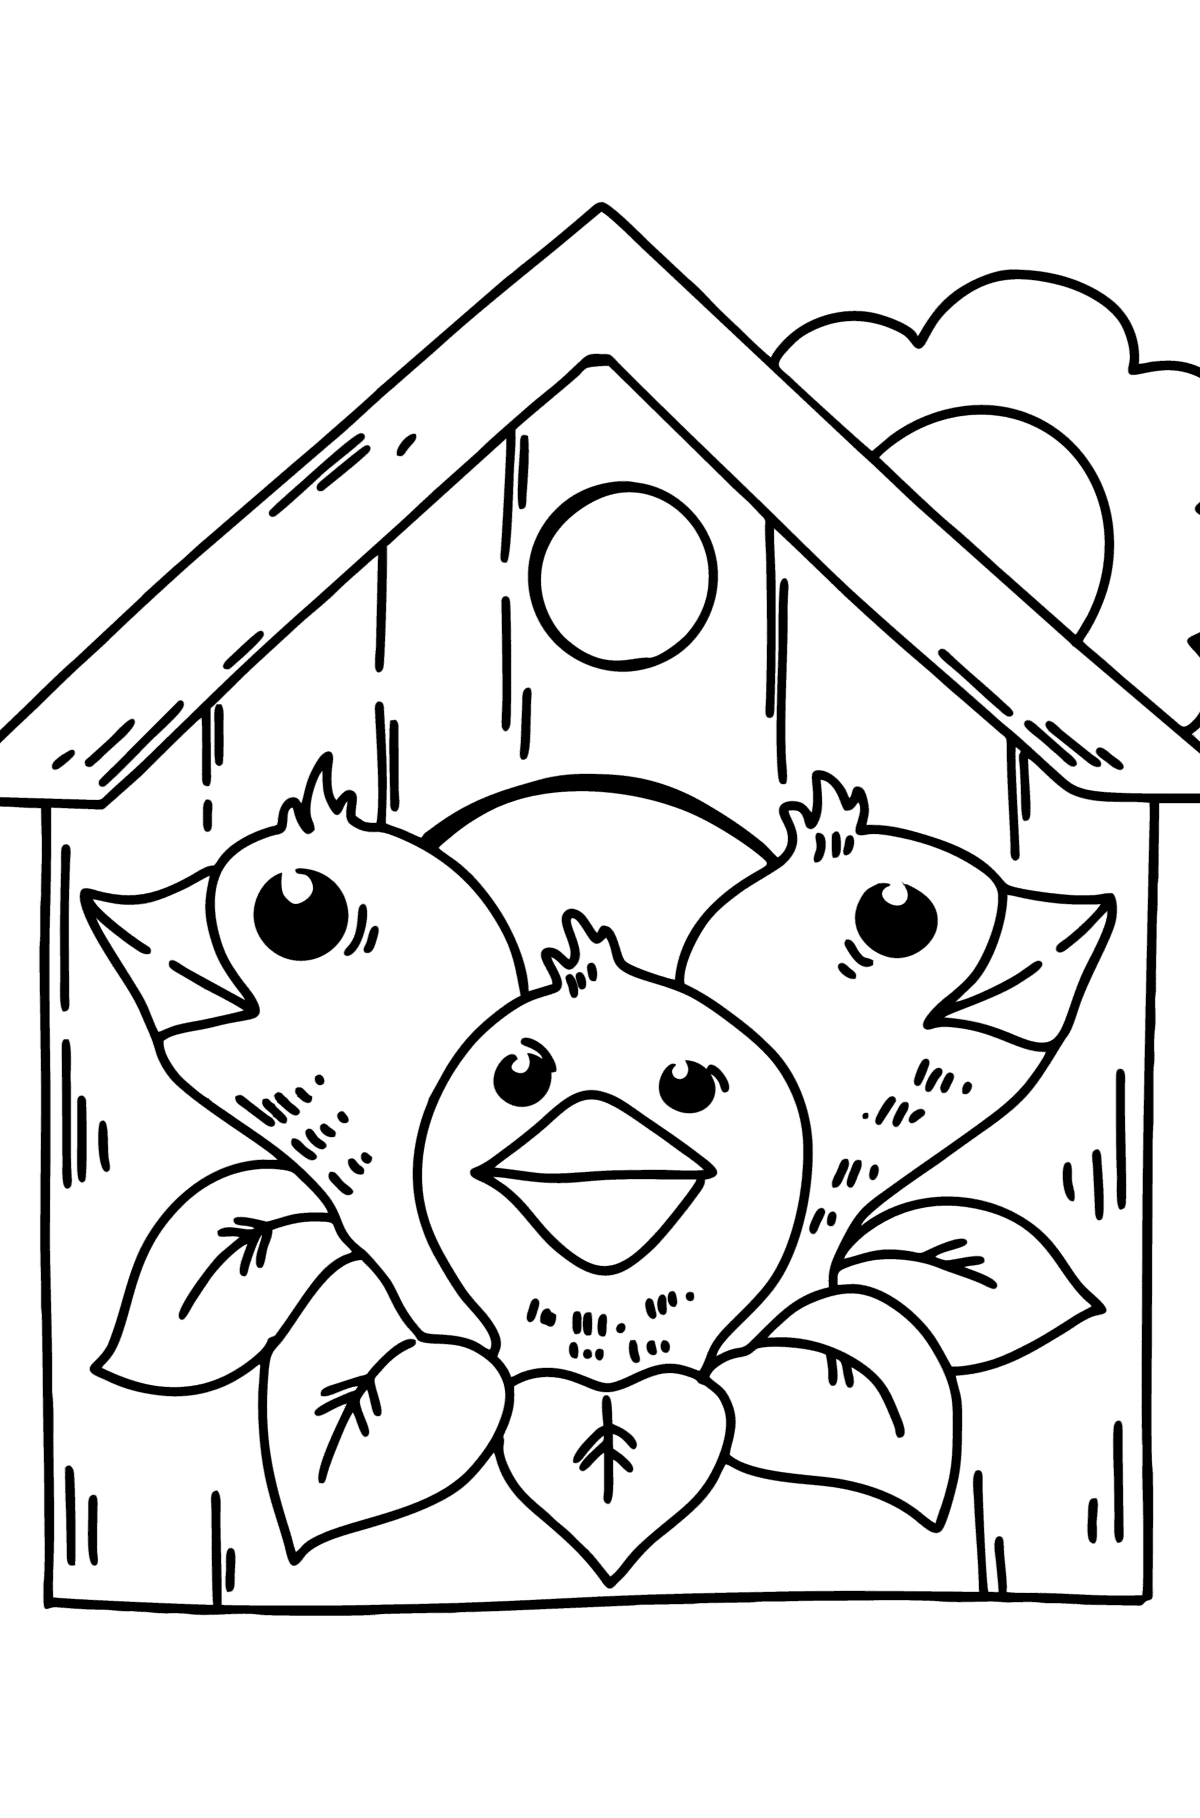 Chicks in a Birdhouse coloring page - Coloring Pages for Kids